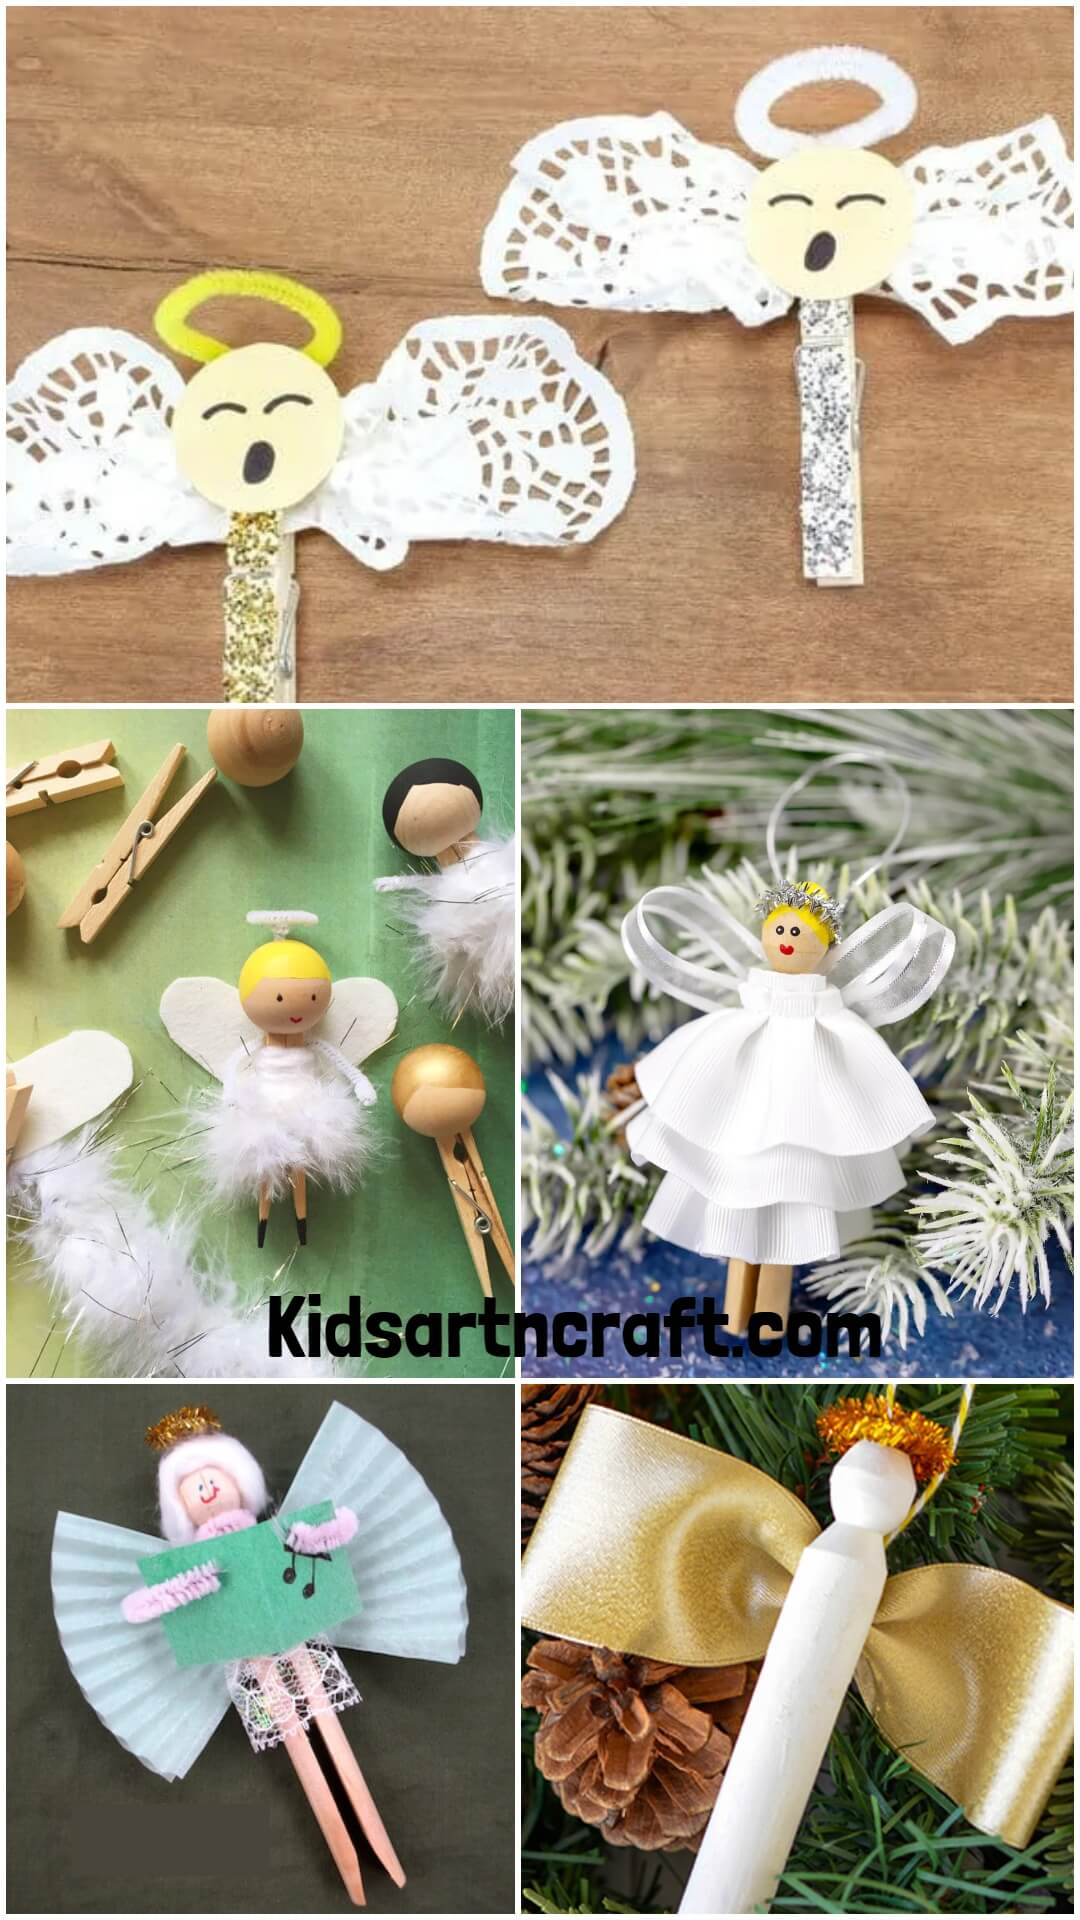 Clothespin Angel Crafts For Kids